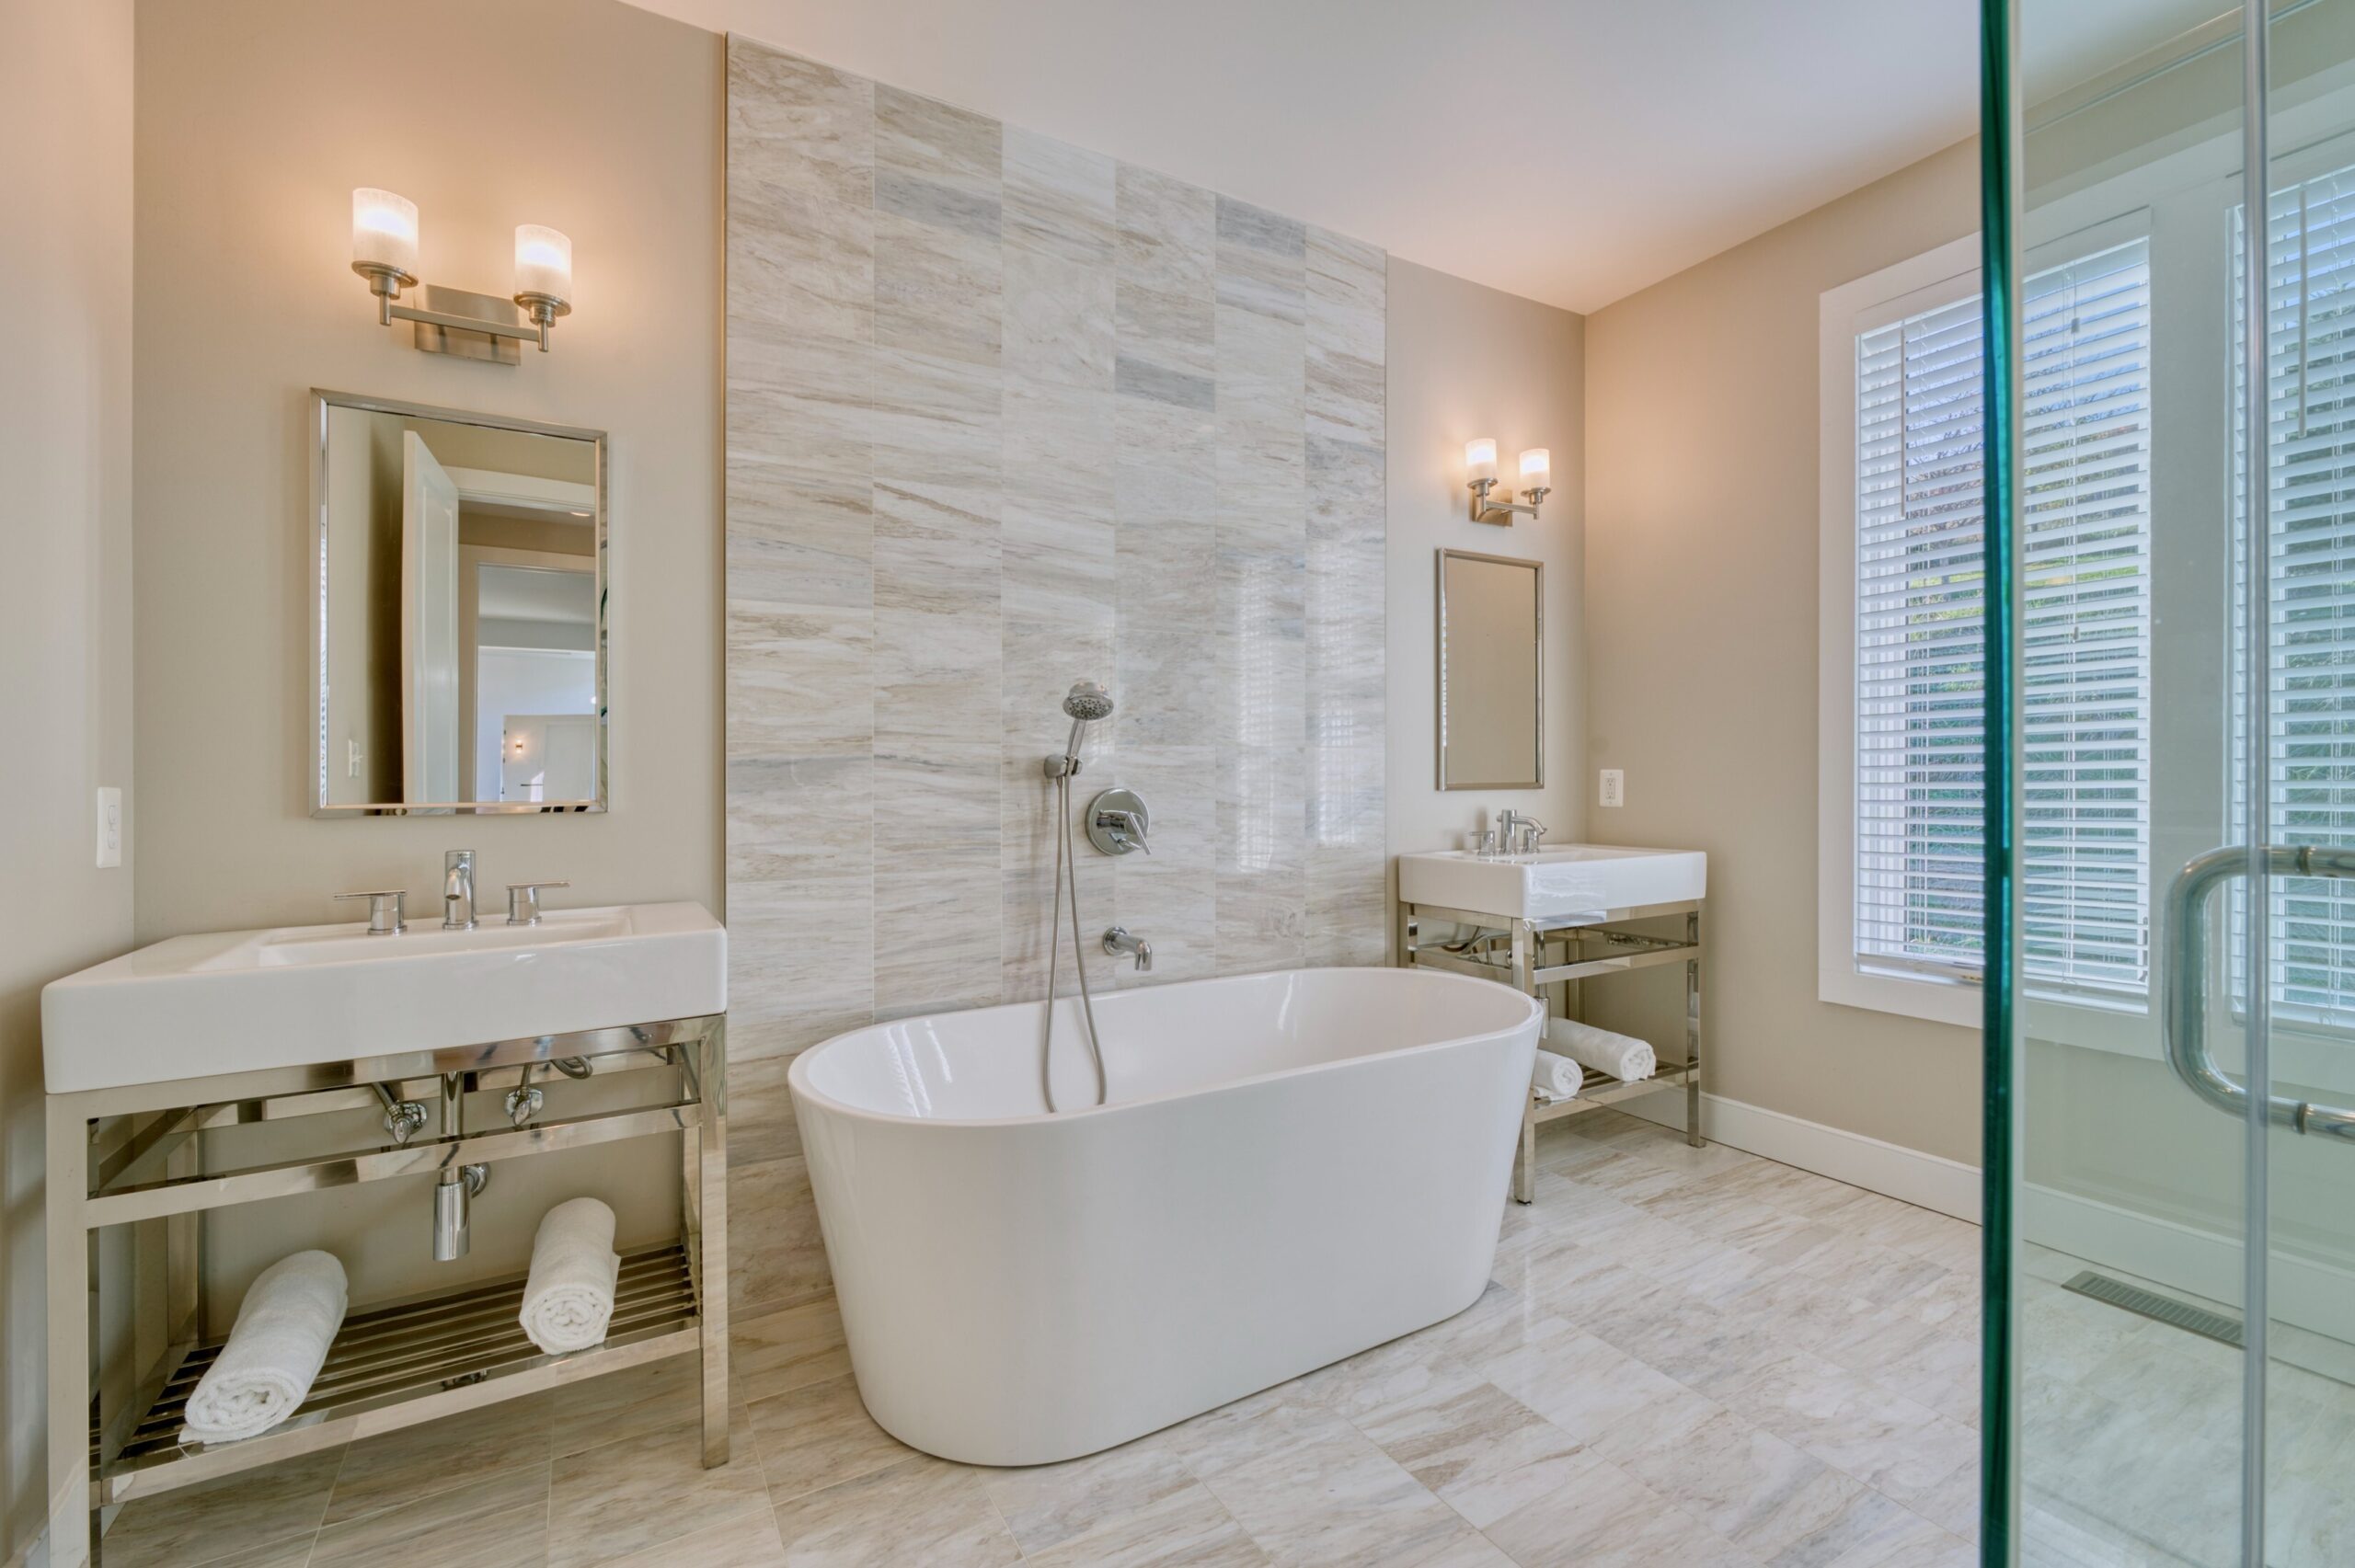 Professional interior photo of 17151 Brookdale Ln in Round Hill, VA - showing the primary bathroom with high end finishes and deep soaking tub